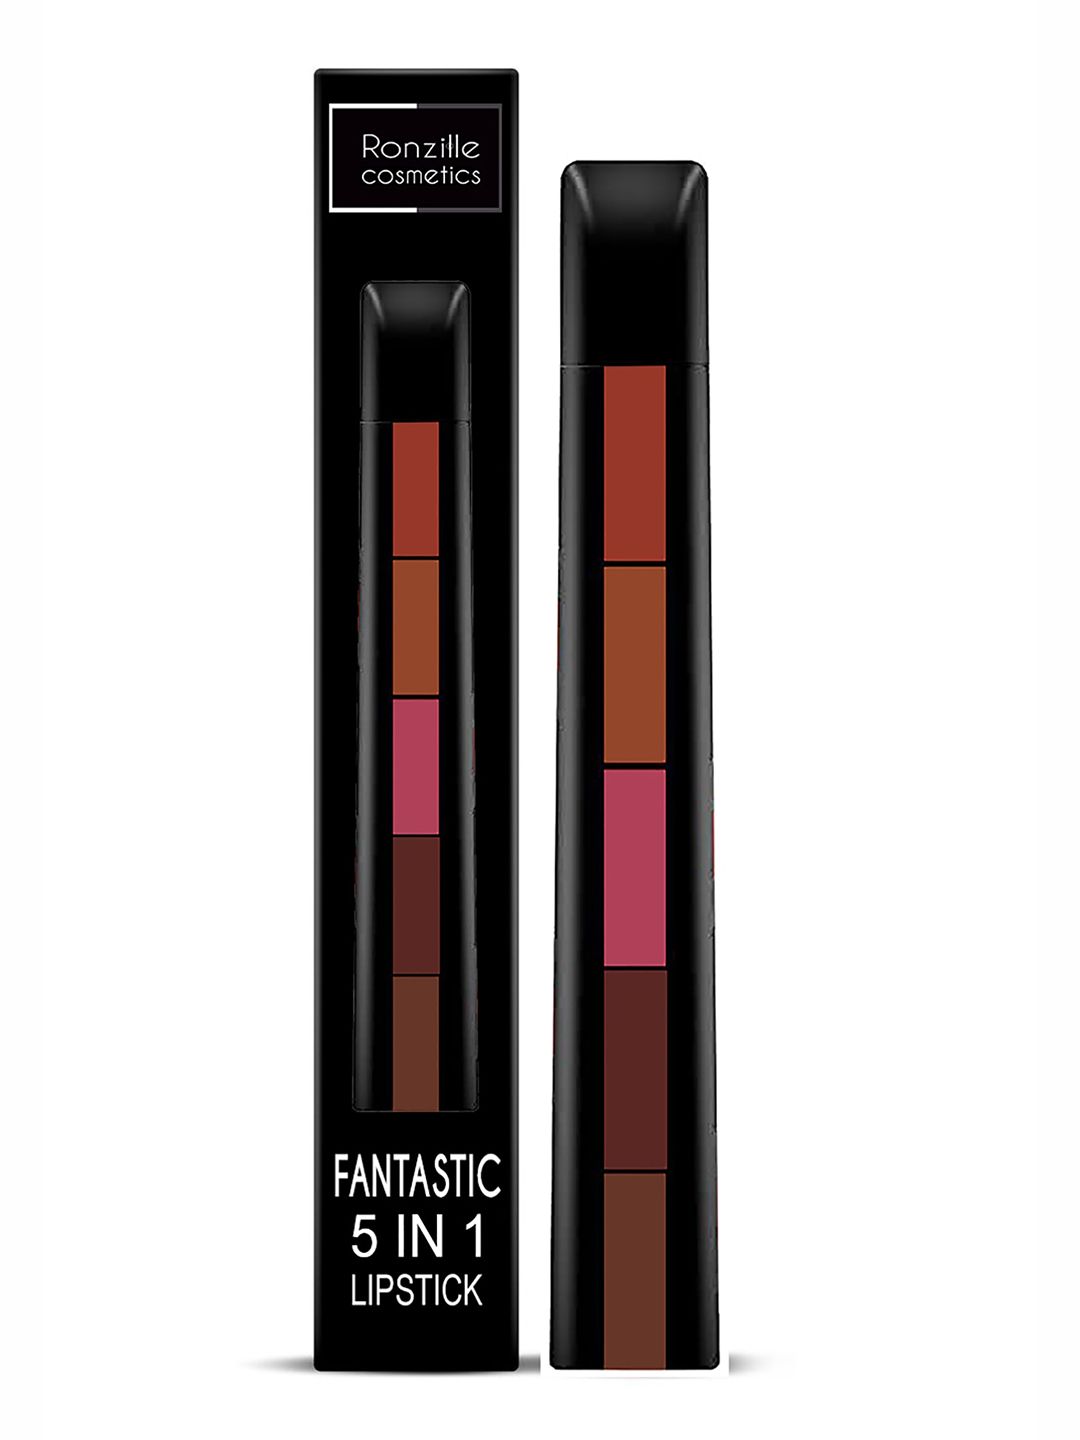 Ronzille Fantastic 5in1 Lipstick Shade -A Price in India